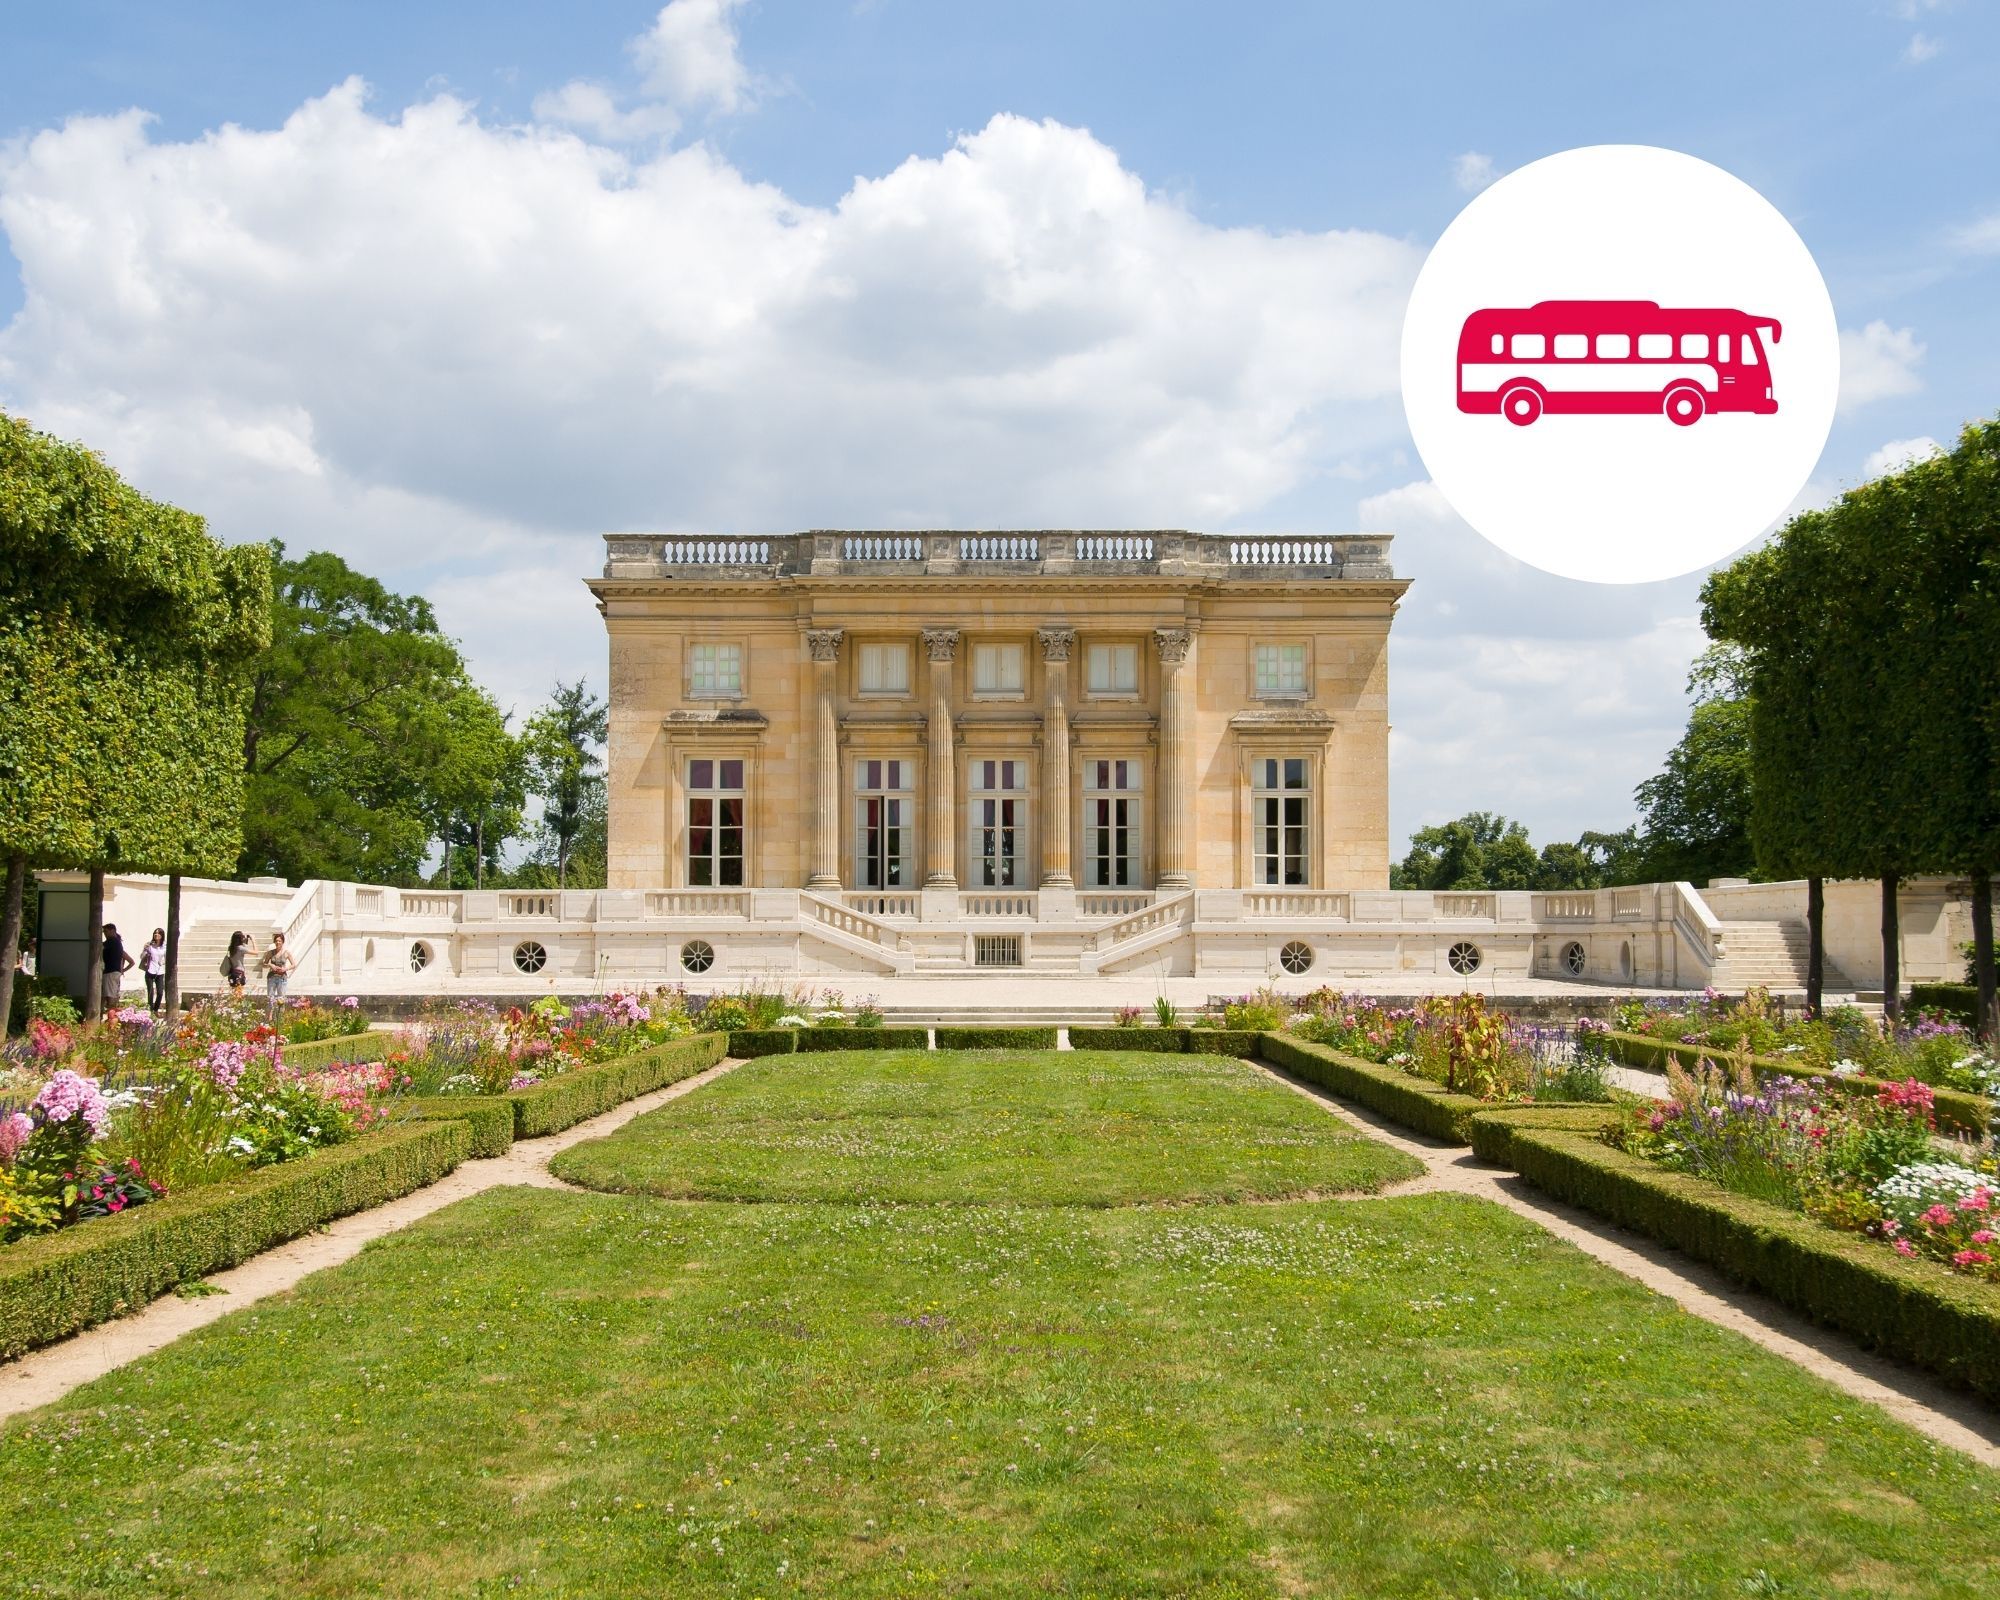 Audio Guided Tour of the Palace of Versailles and Access to the whole Estate Day Trip from Paris with transportation